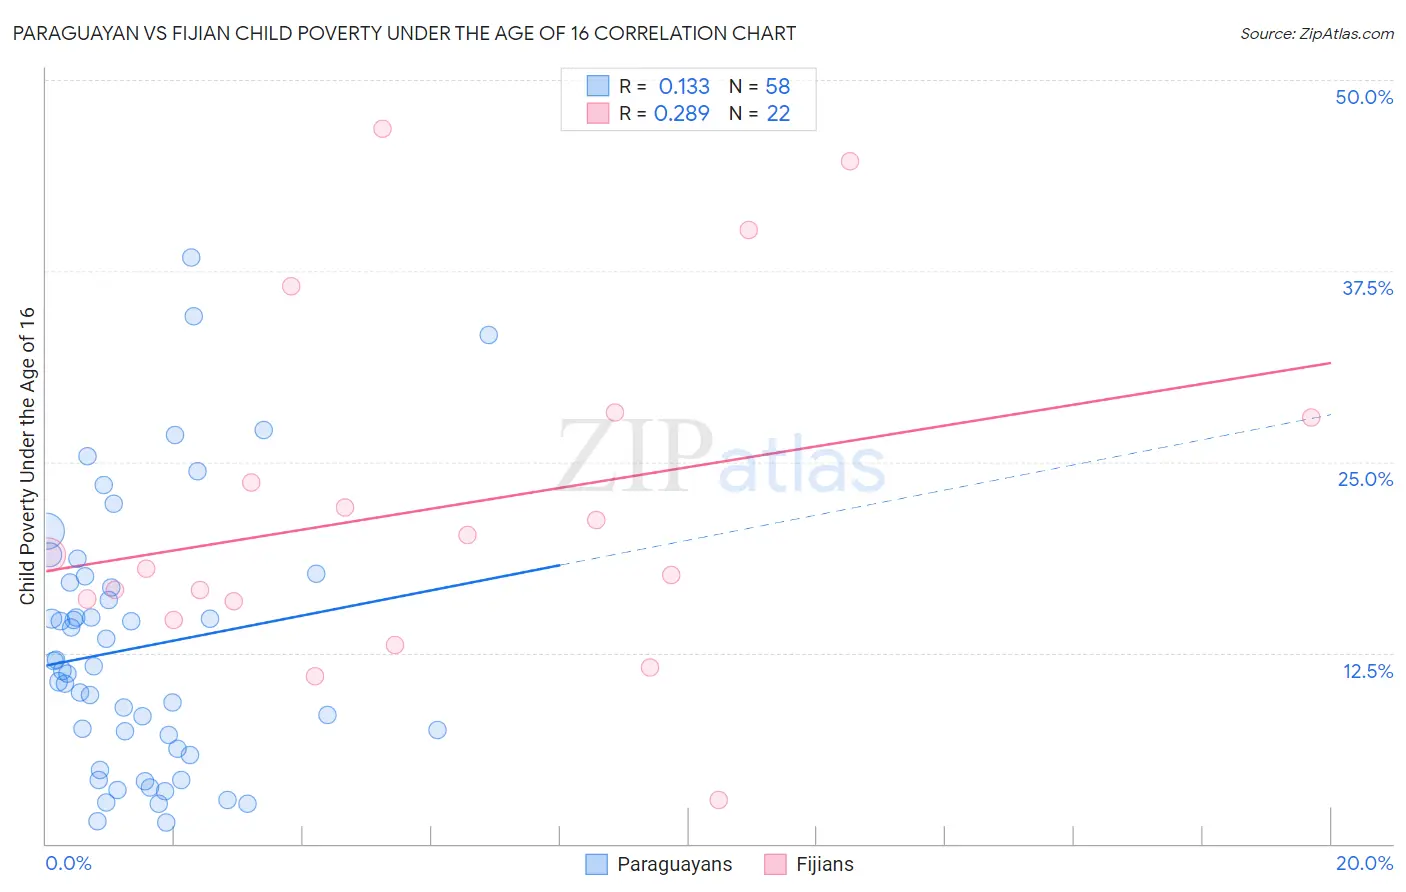 Paraguayan vs Fijian Child Poverty Under the Age of 16